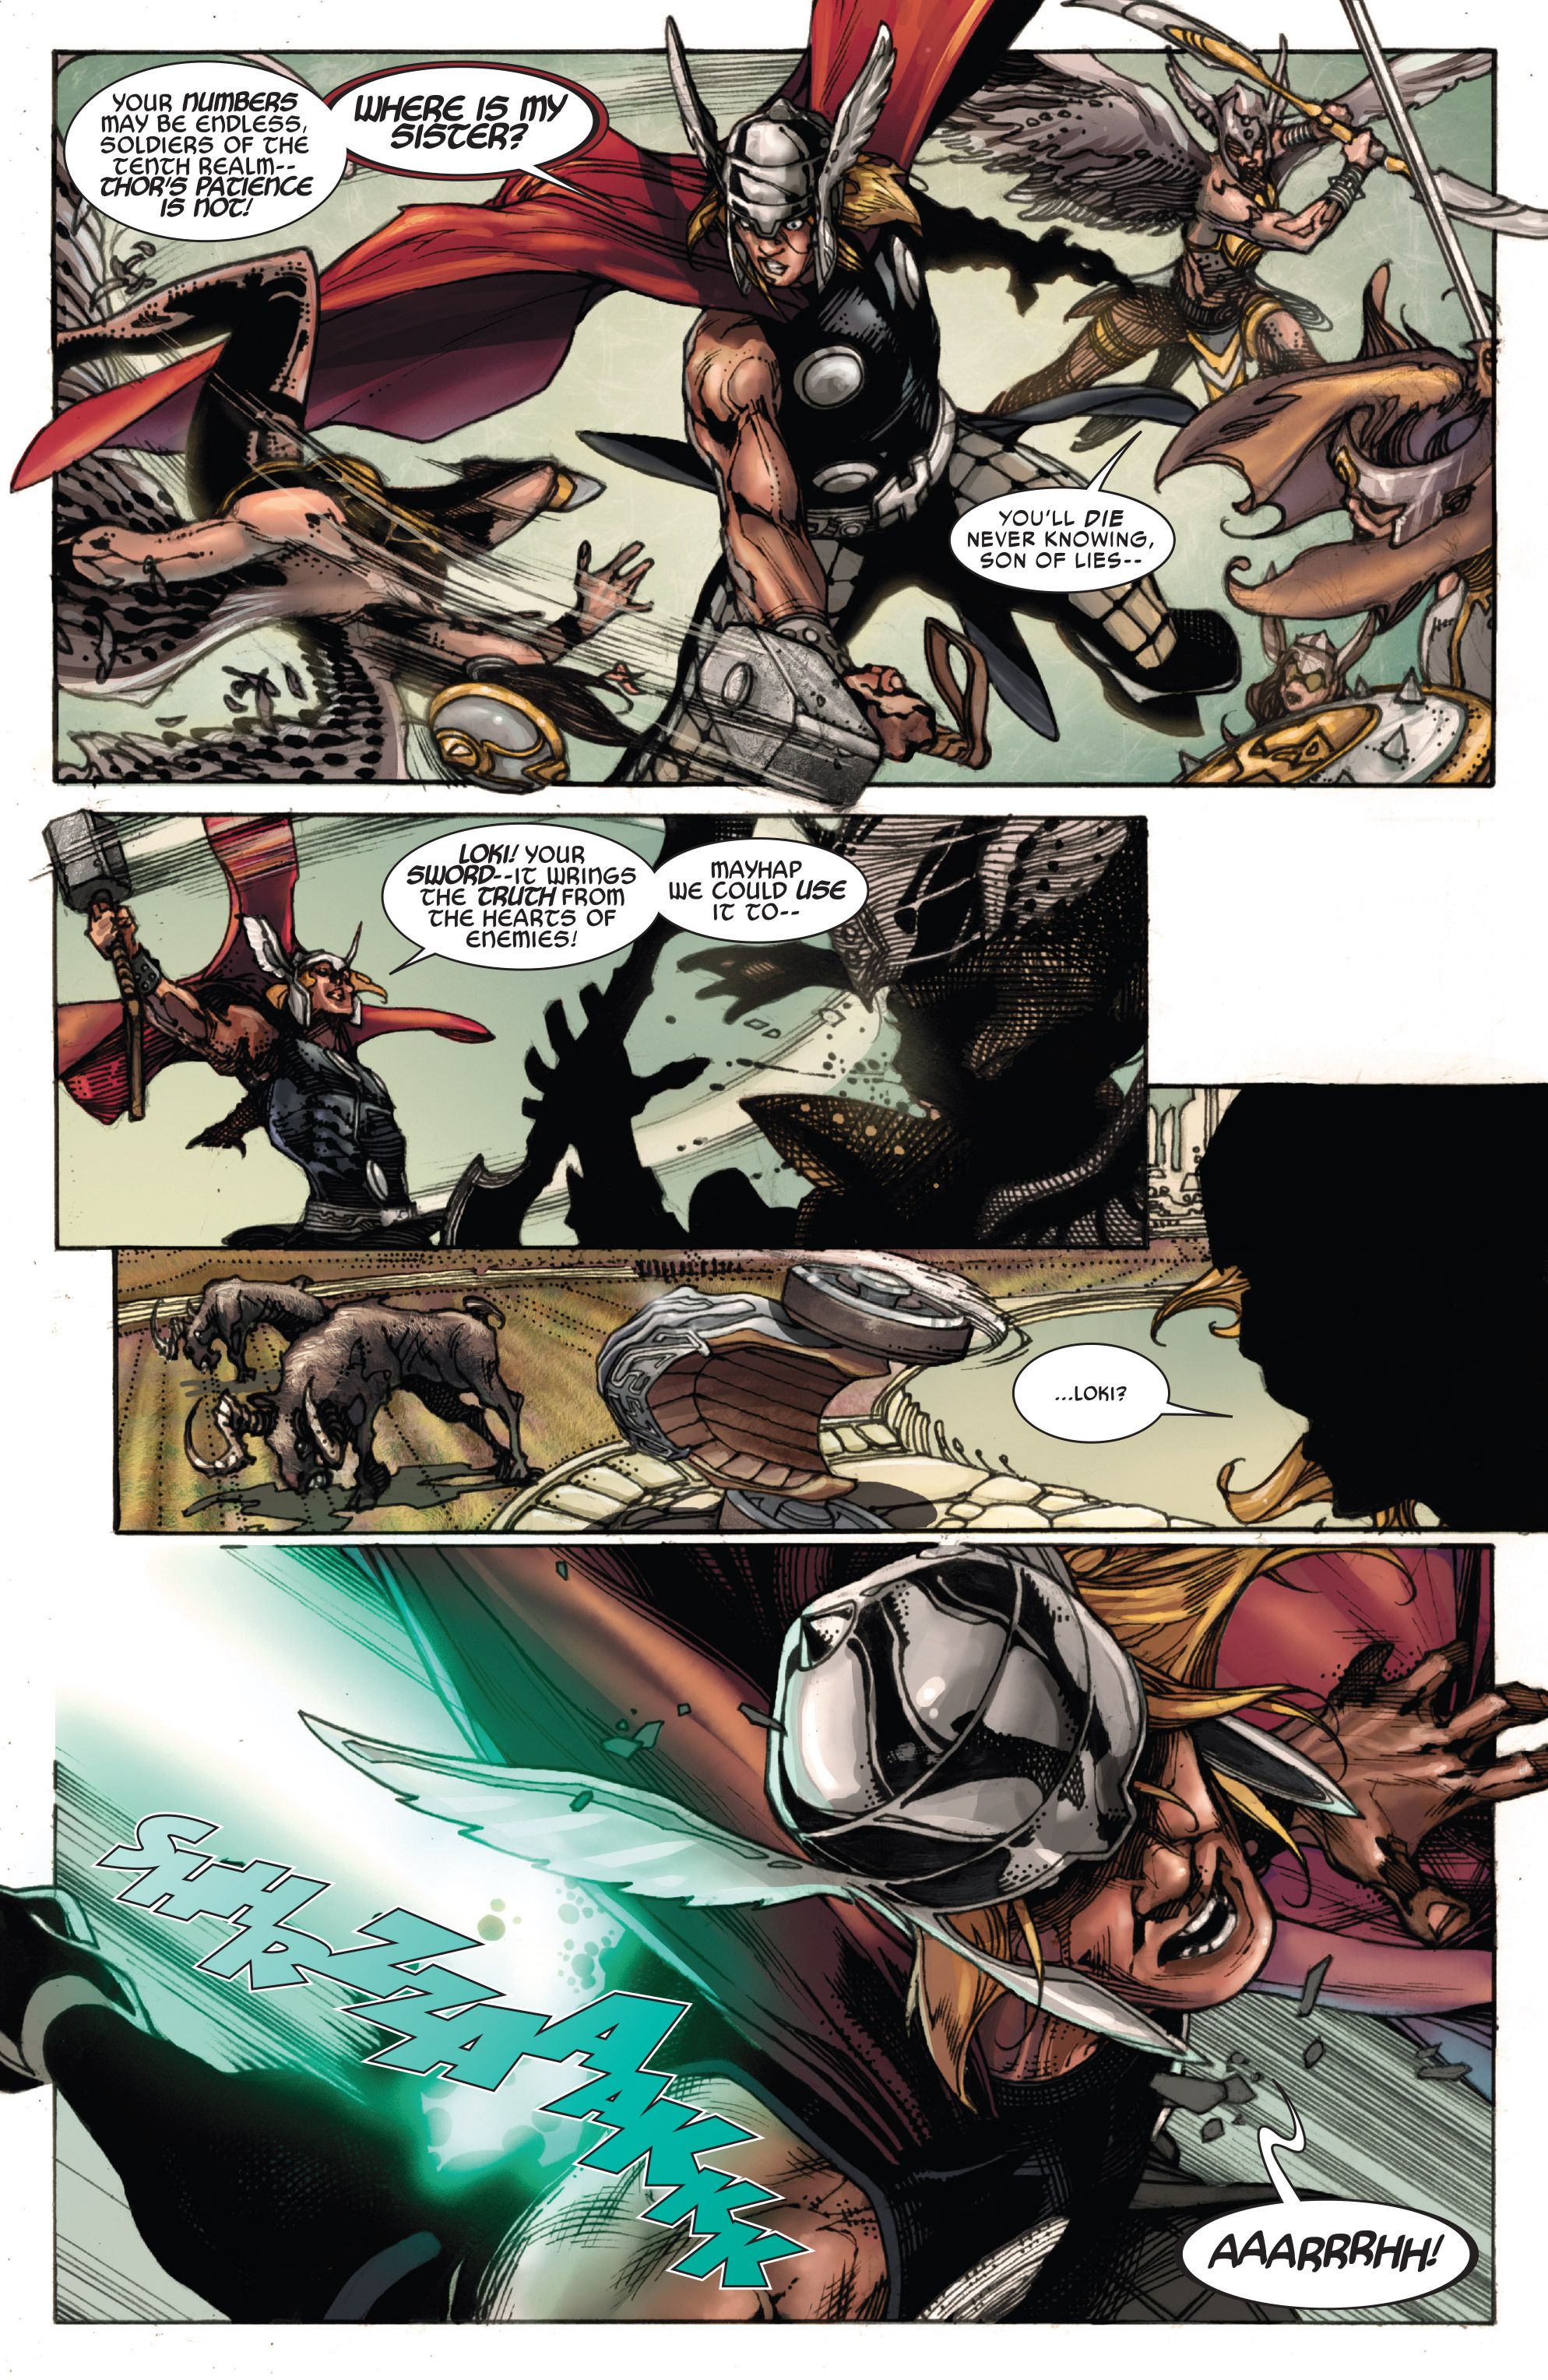 Thor fights his way through Heven